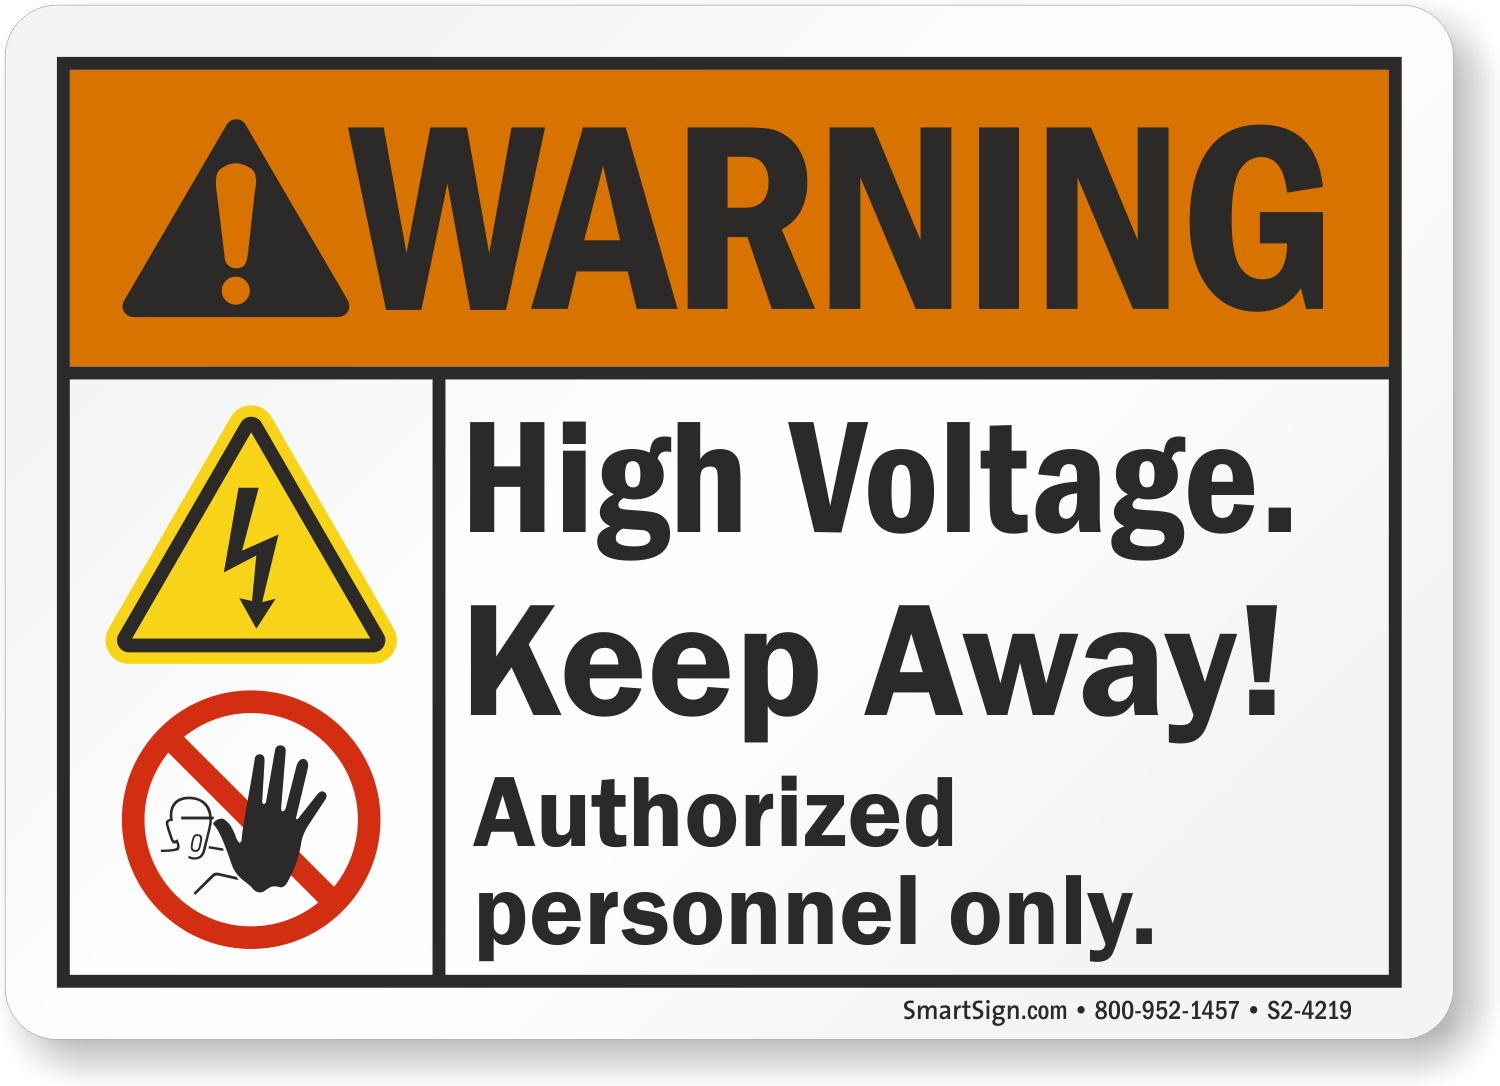 SmartSign Danger High Voltage Keep Away with Graphic Plastic Sign 10 x 7 10 x 7 Lyle Signs S-2242-PL-10 